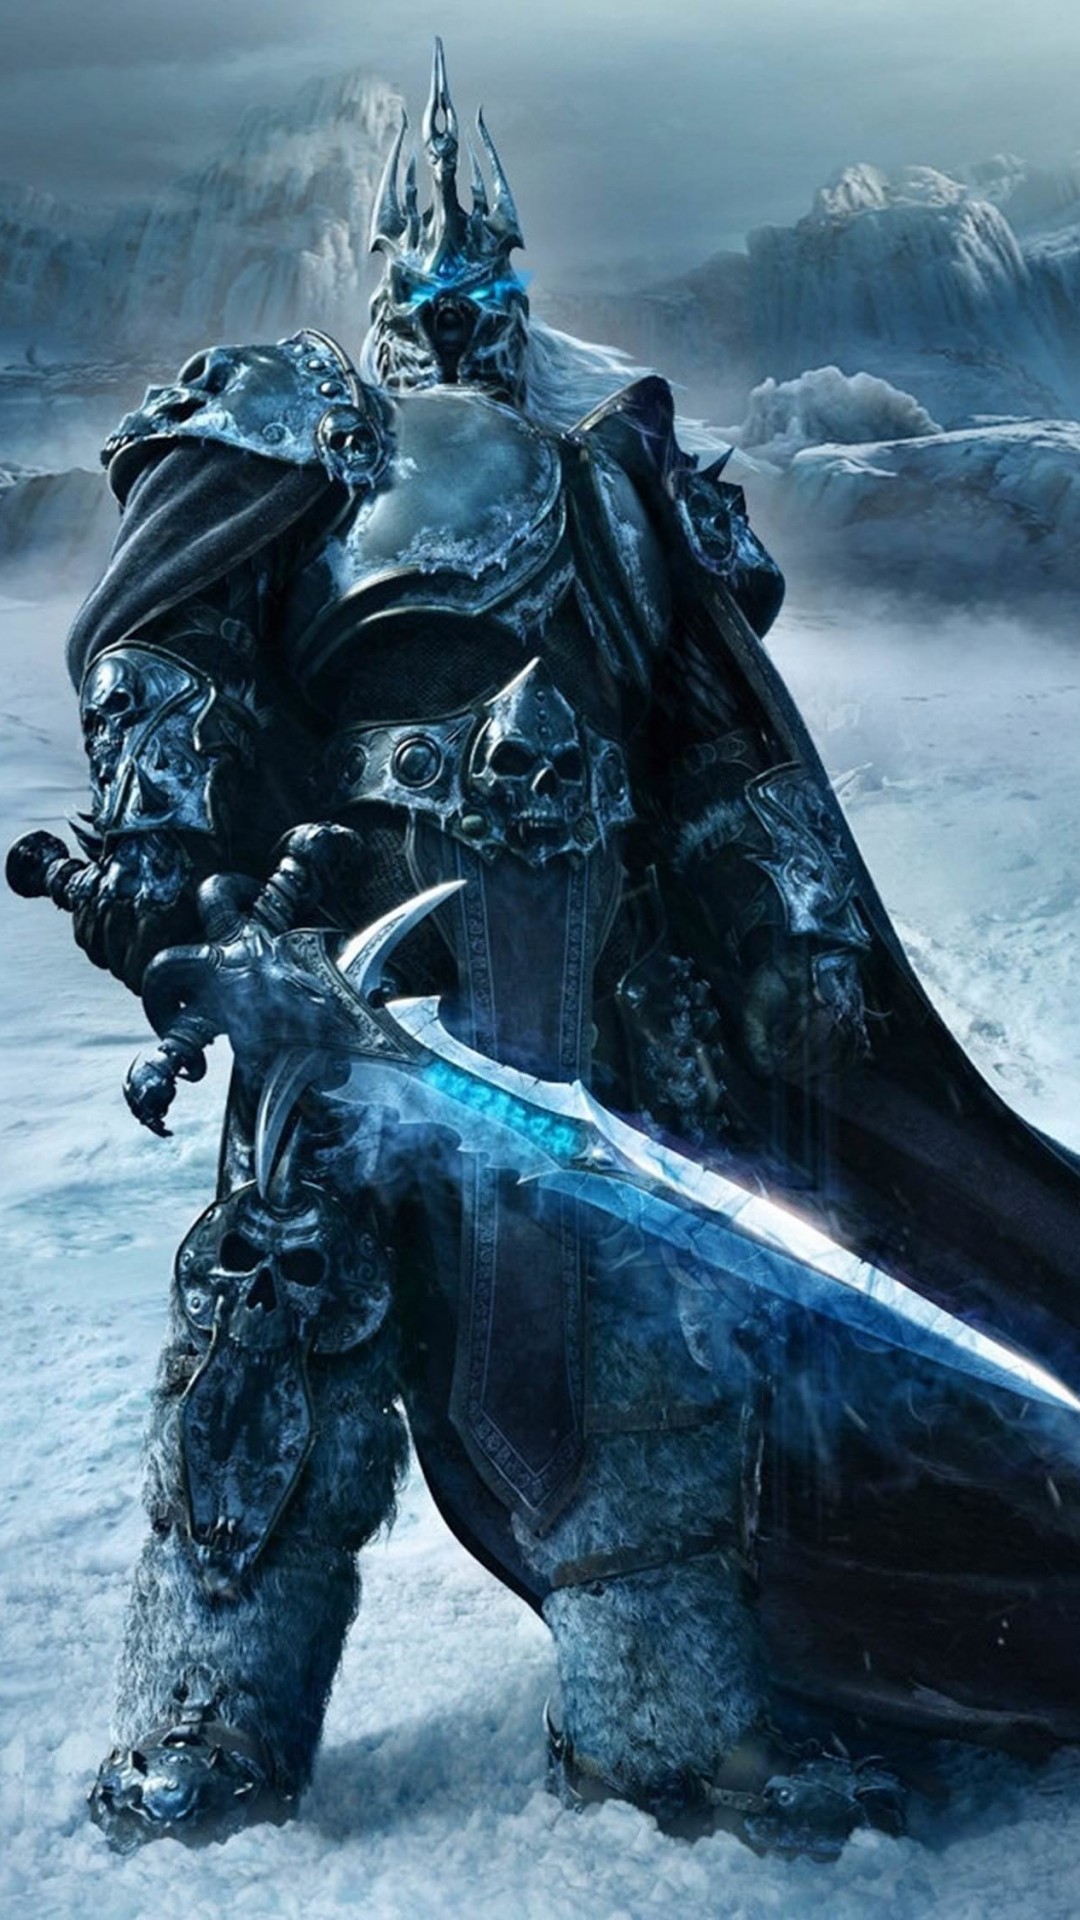 World of Warcraft: Wrath of the Lich King Wallpaper for SONY Xperia Z1